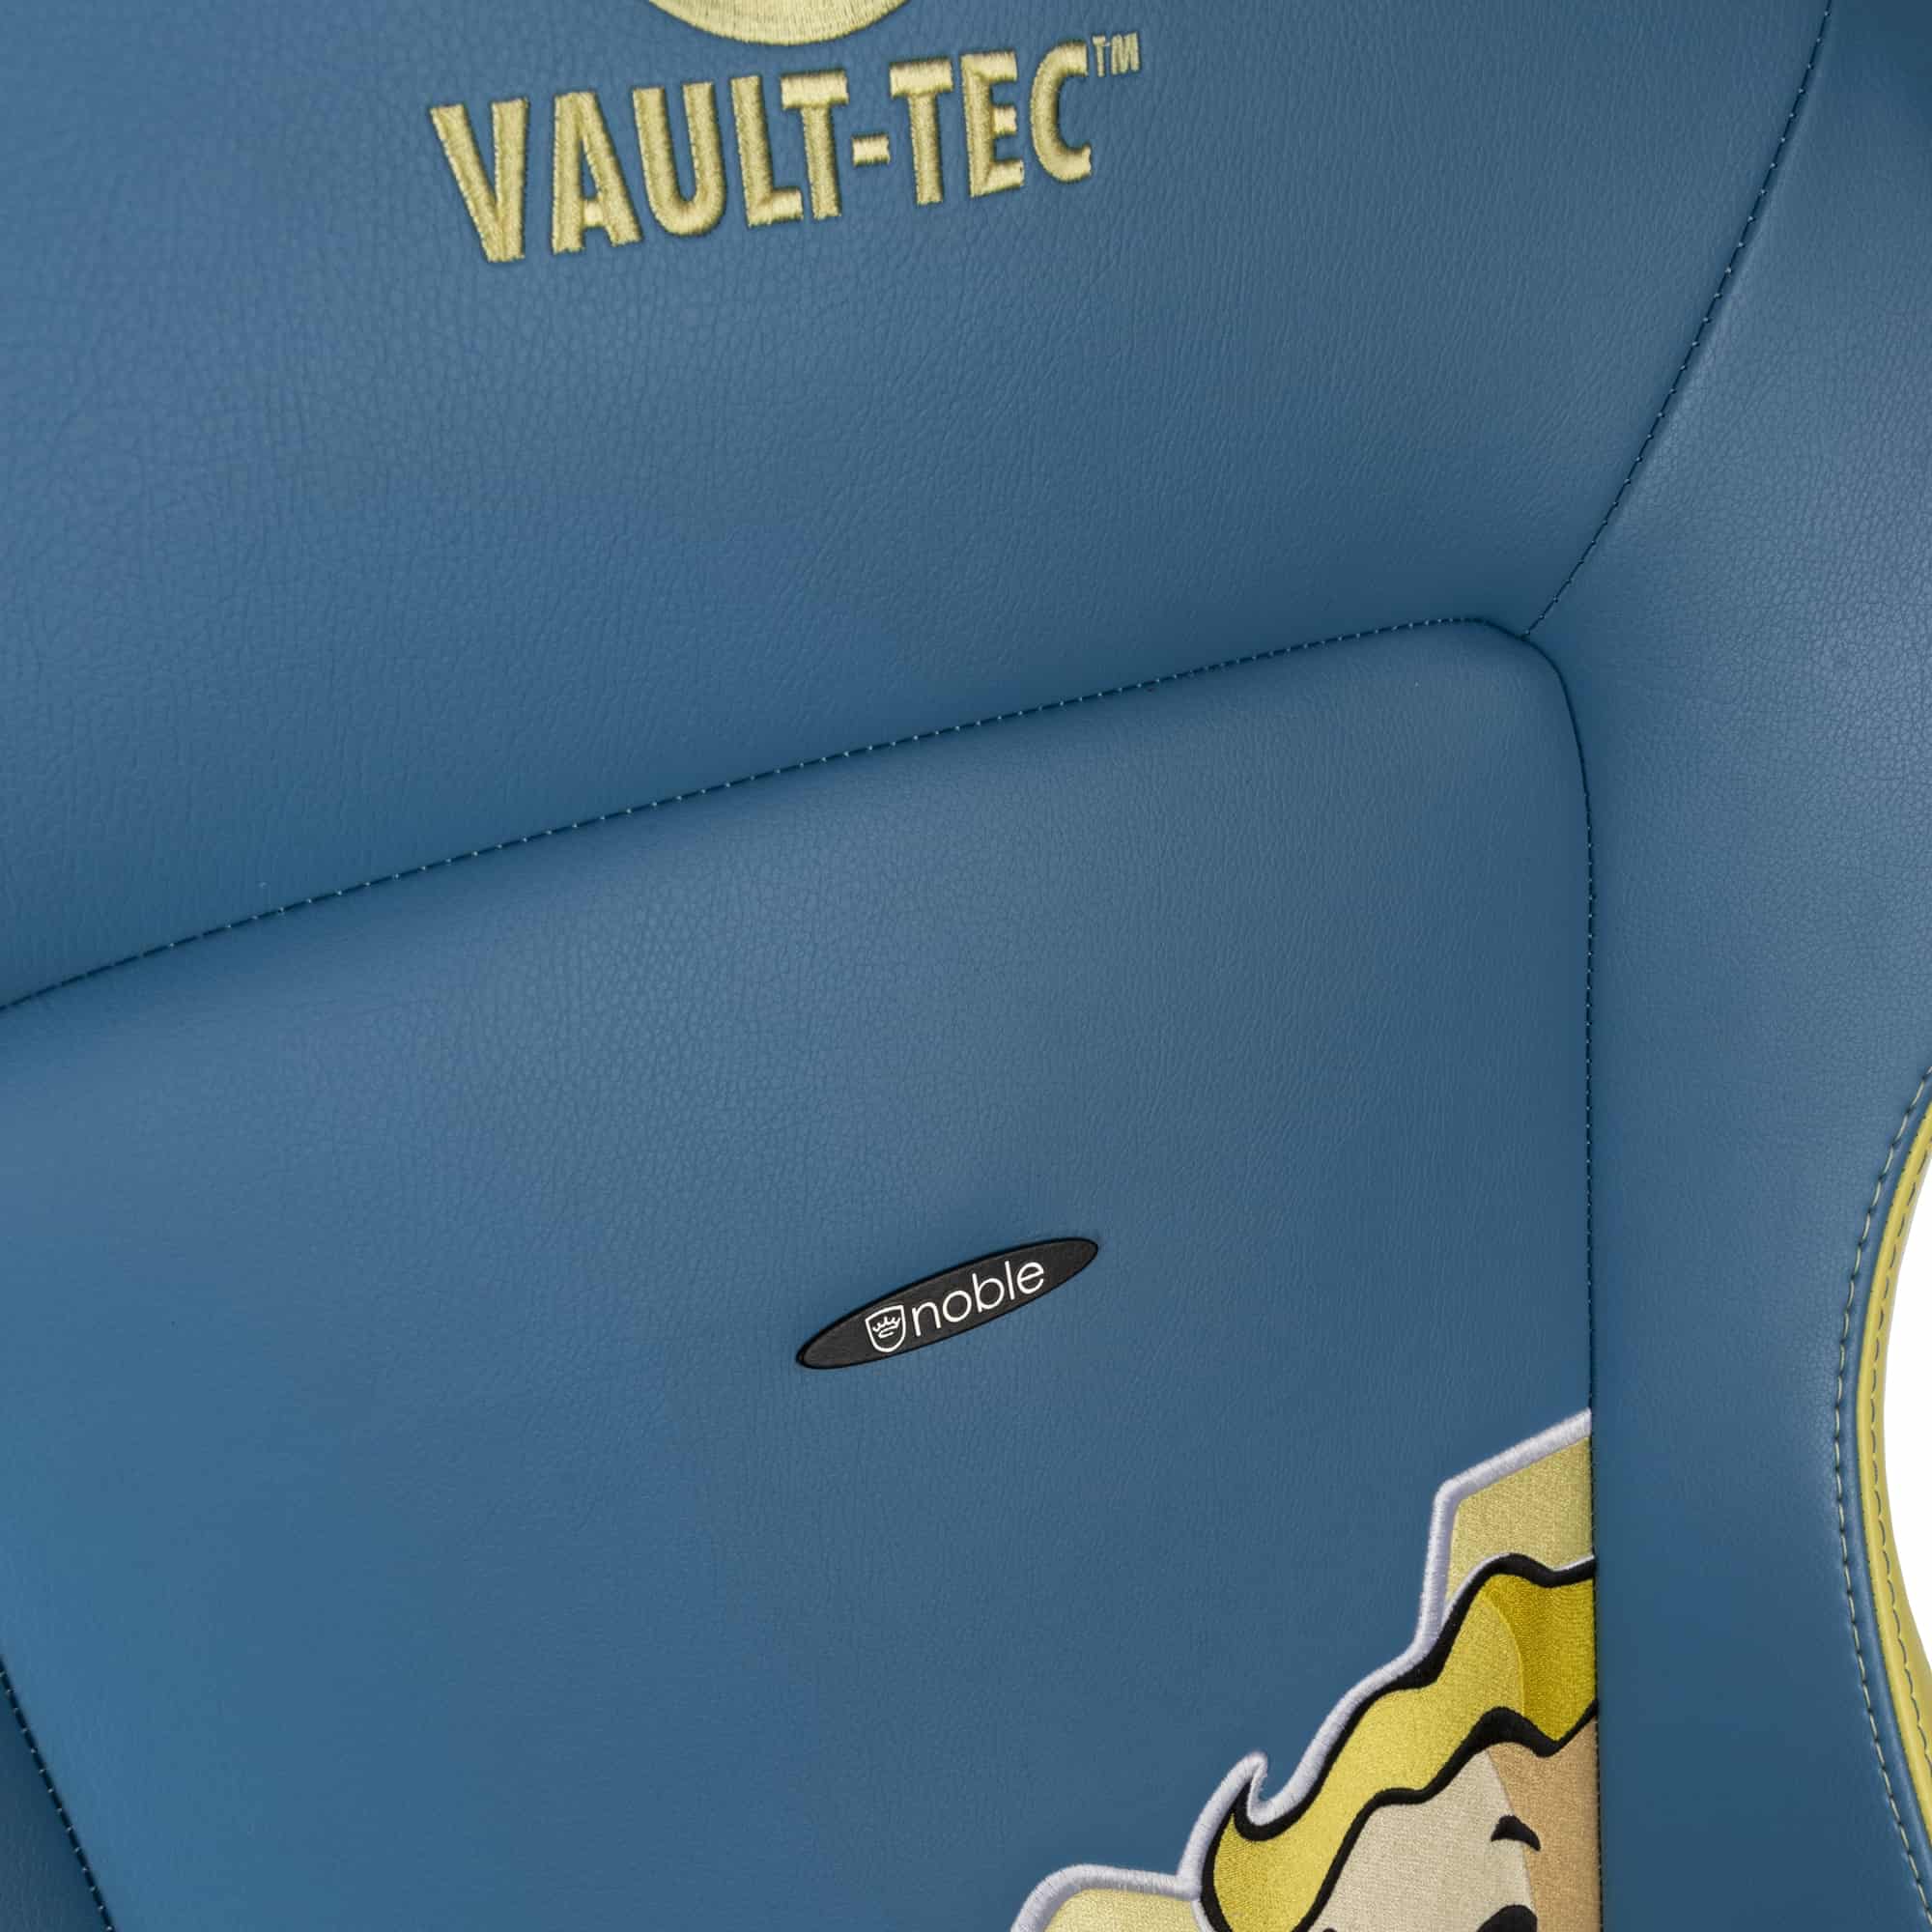 Gaming Chair noblechairs HERO Fallout Vault Tec Special Edition